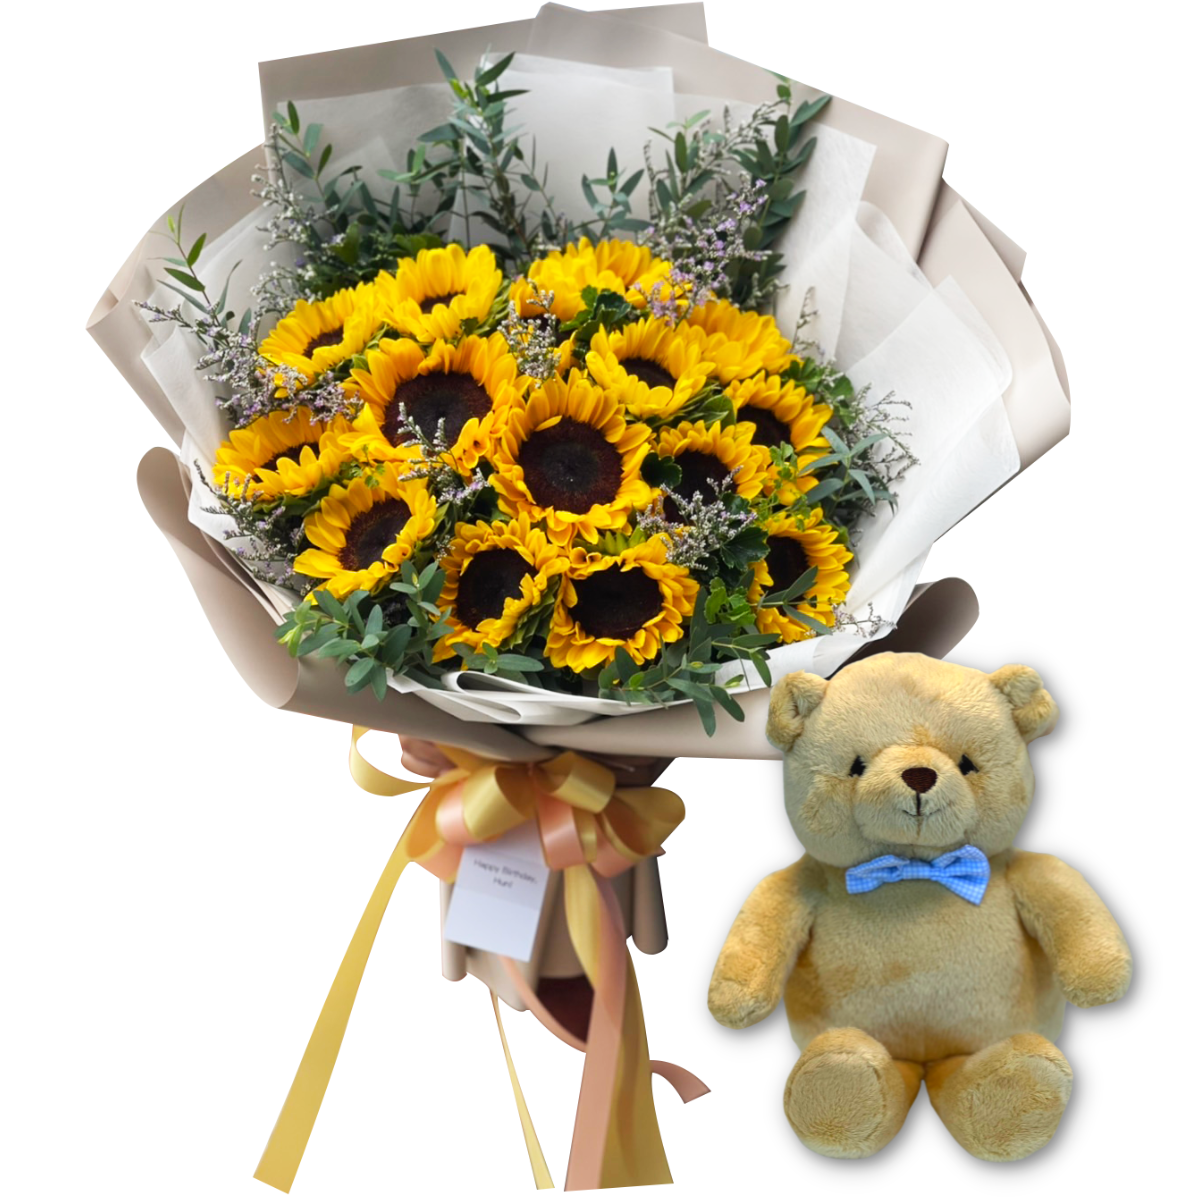 "Sun Shining" Bouquet Of Sunflowers and Teddy Bear with Bow Tie